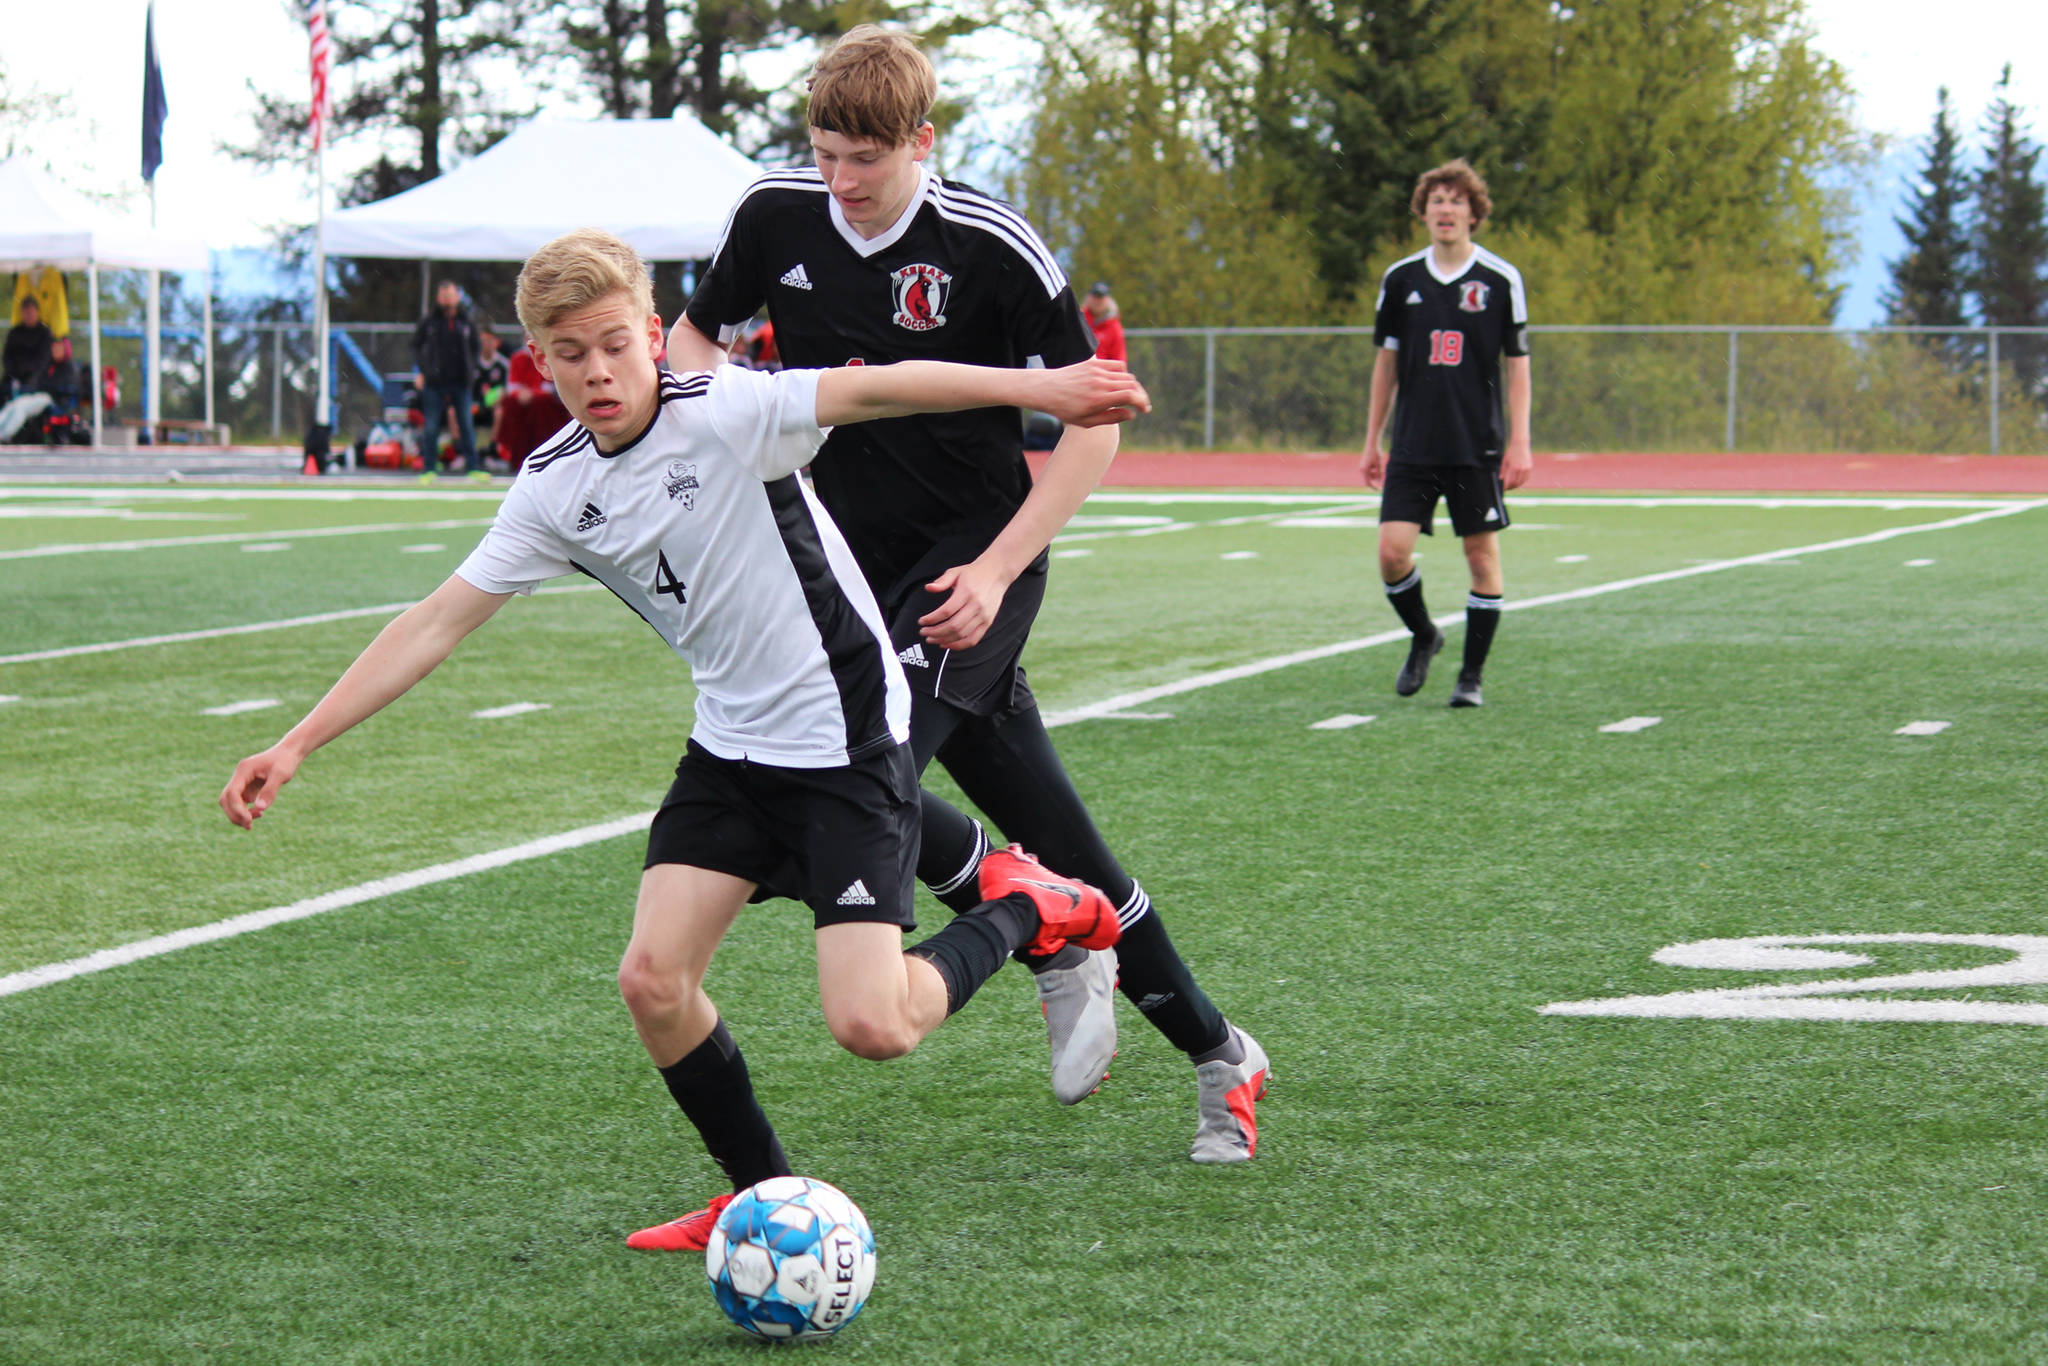 Nikiski’s Gavin White tries to keep control of the ball under pressure from Kenai’s Evan Stockton during a Peninsula Conference Soccer Tournament game Friday, May 17, 2019 at Homer High School in Homer, Alaska. Kenai advanced to the conference championship game on Saturday with a 3-0 win over the Bulldogs. (Photo by Megan Pacer/Homer News)